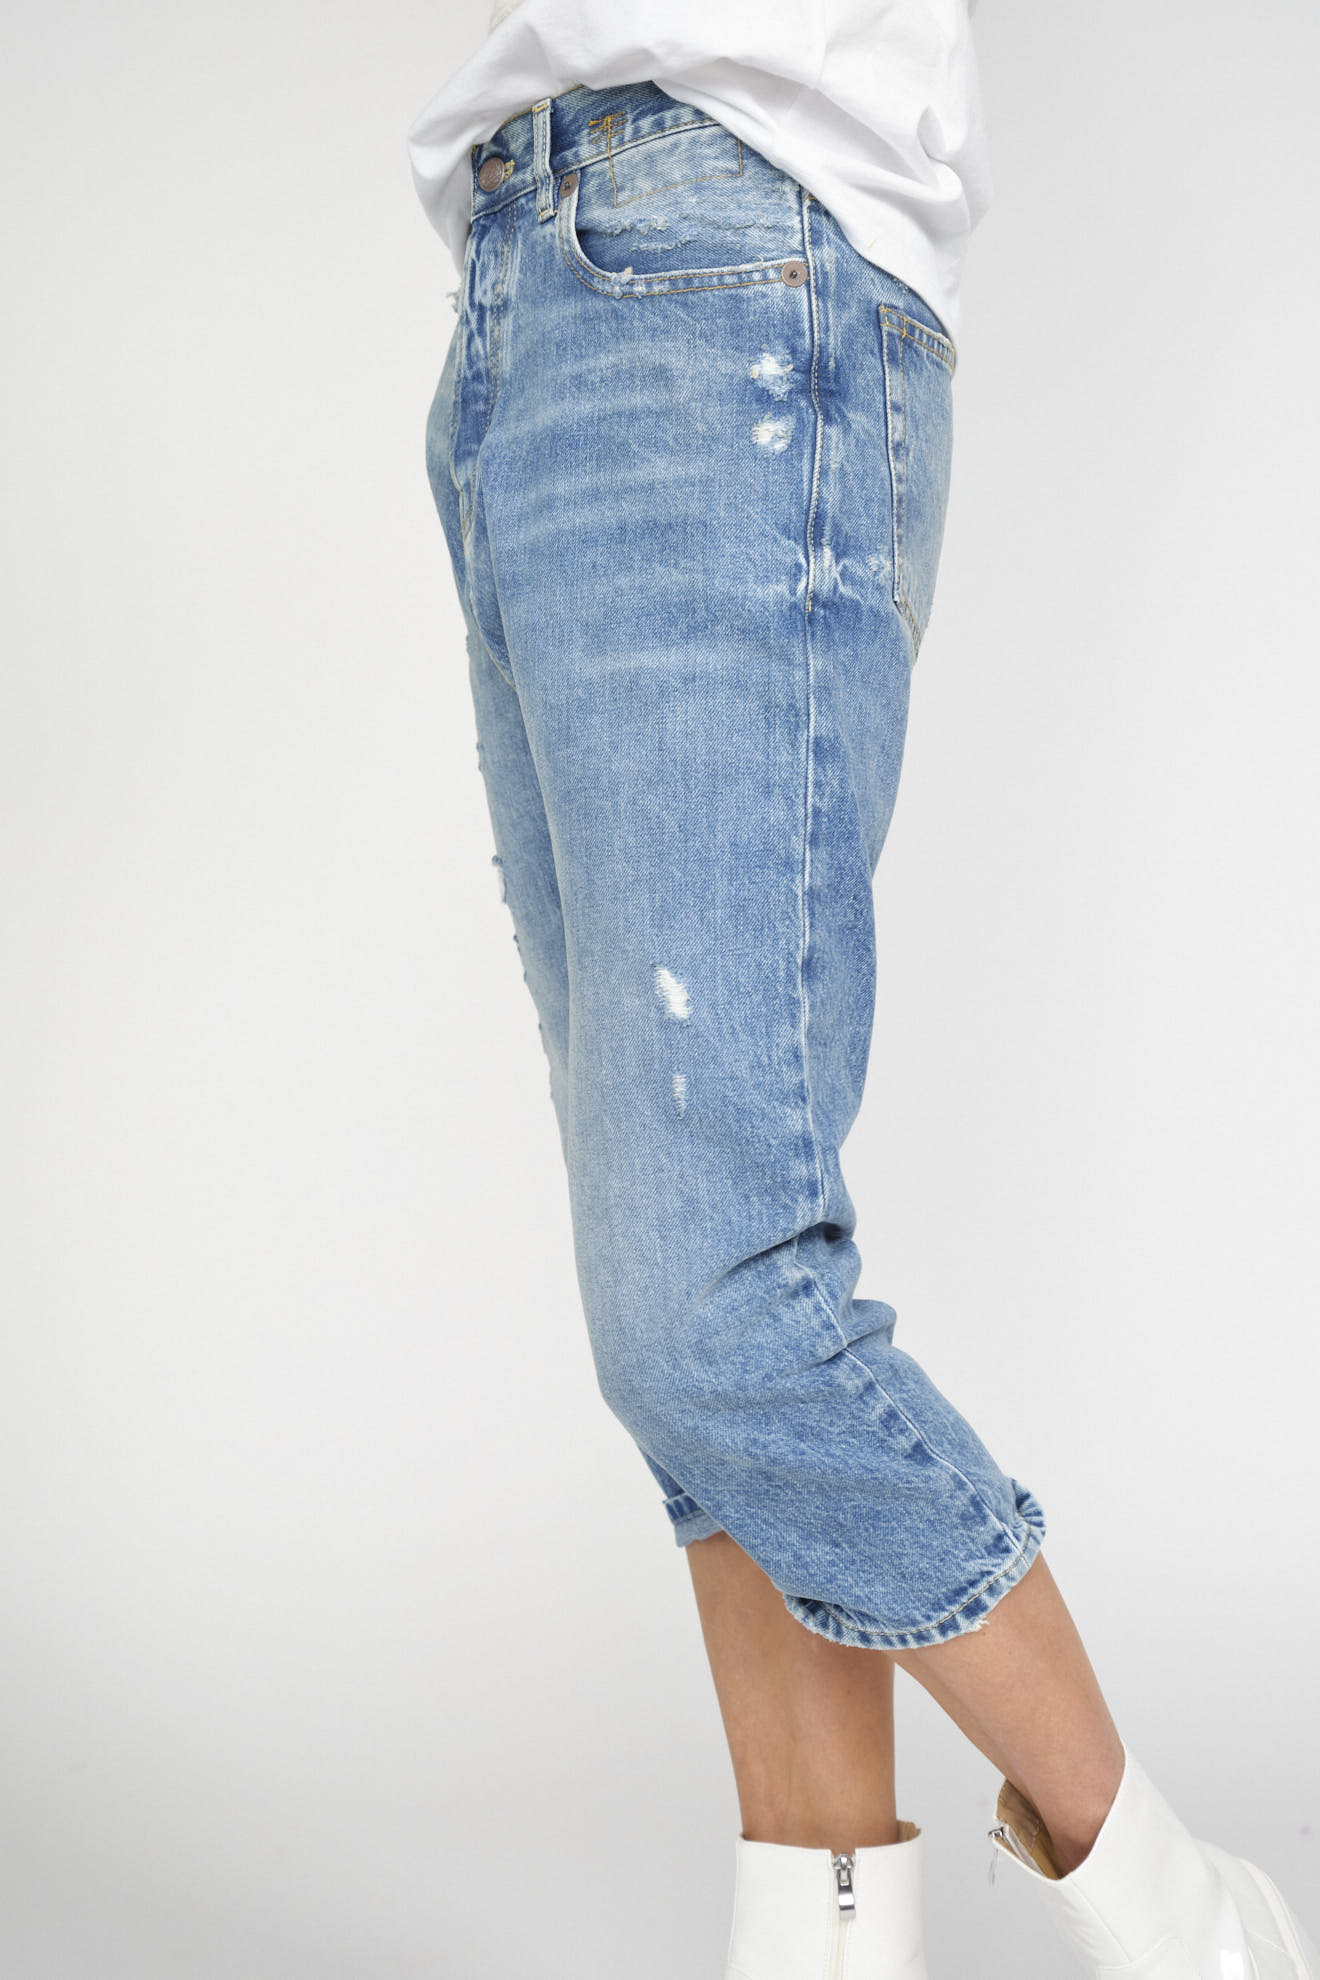 R13 Tailored Drop Jeans blue 27